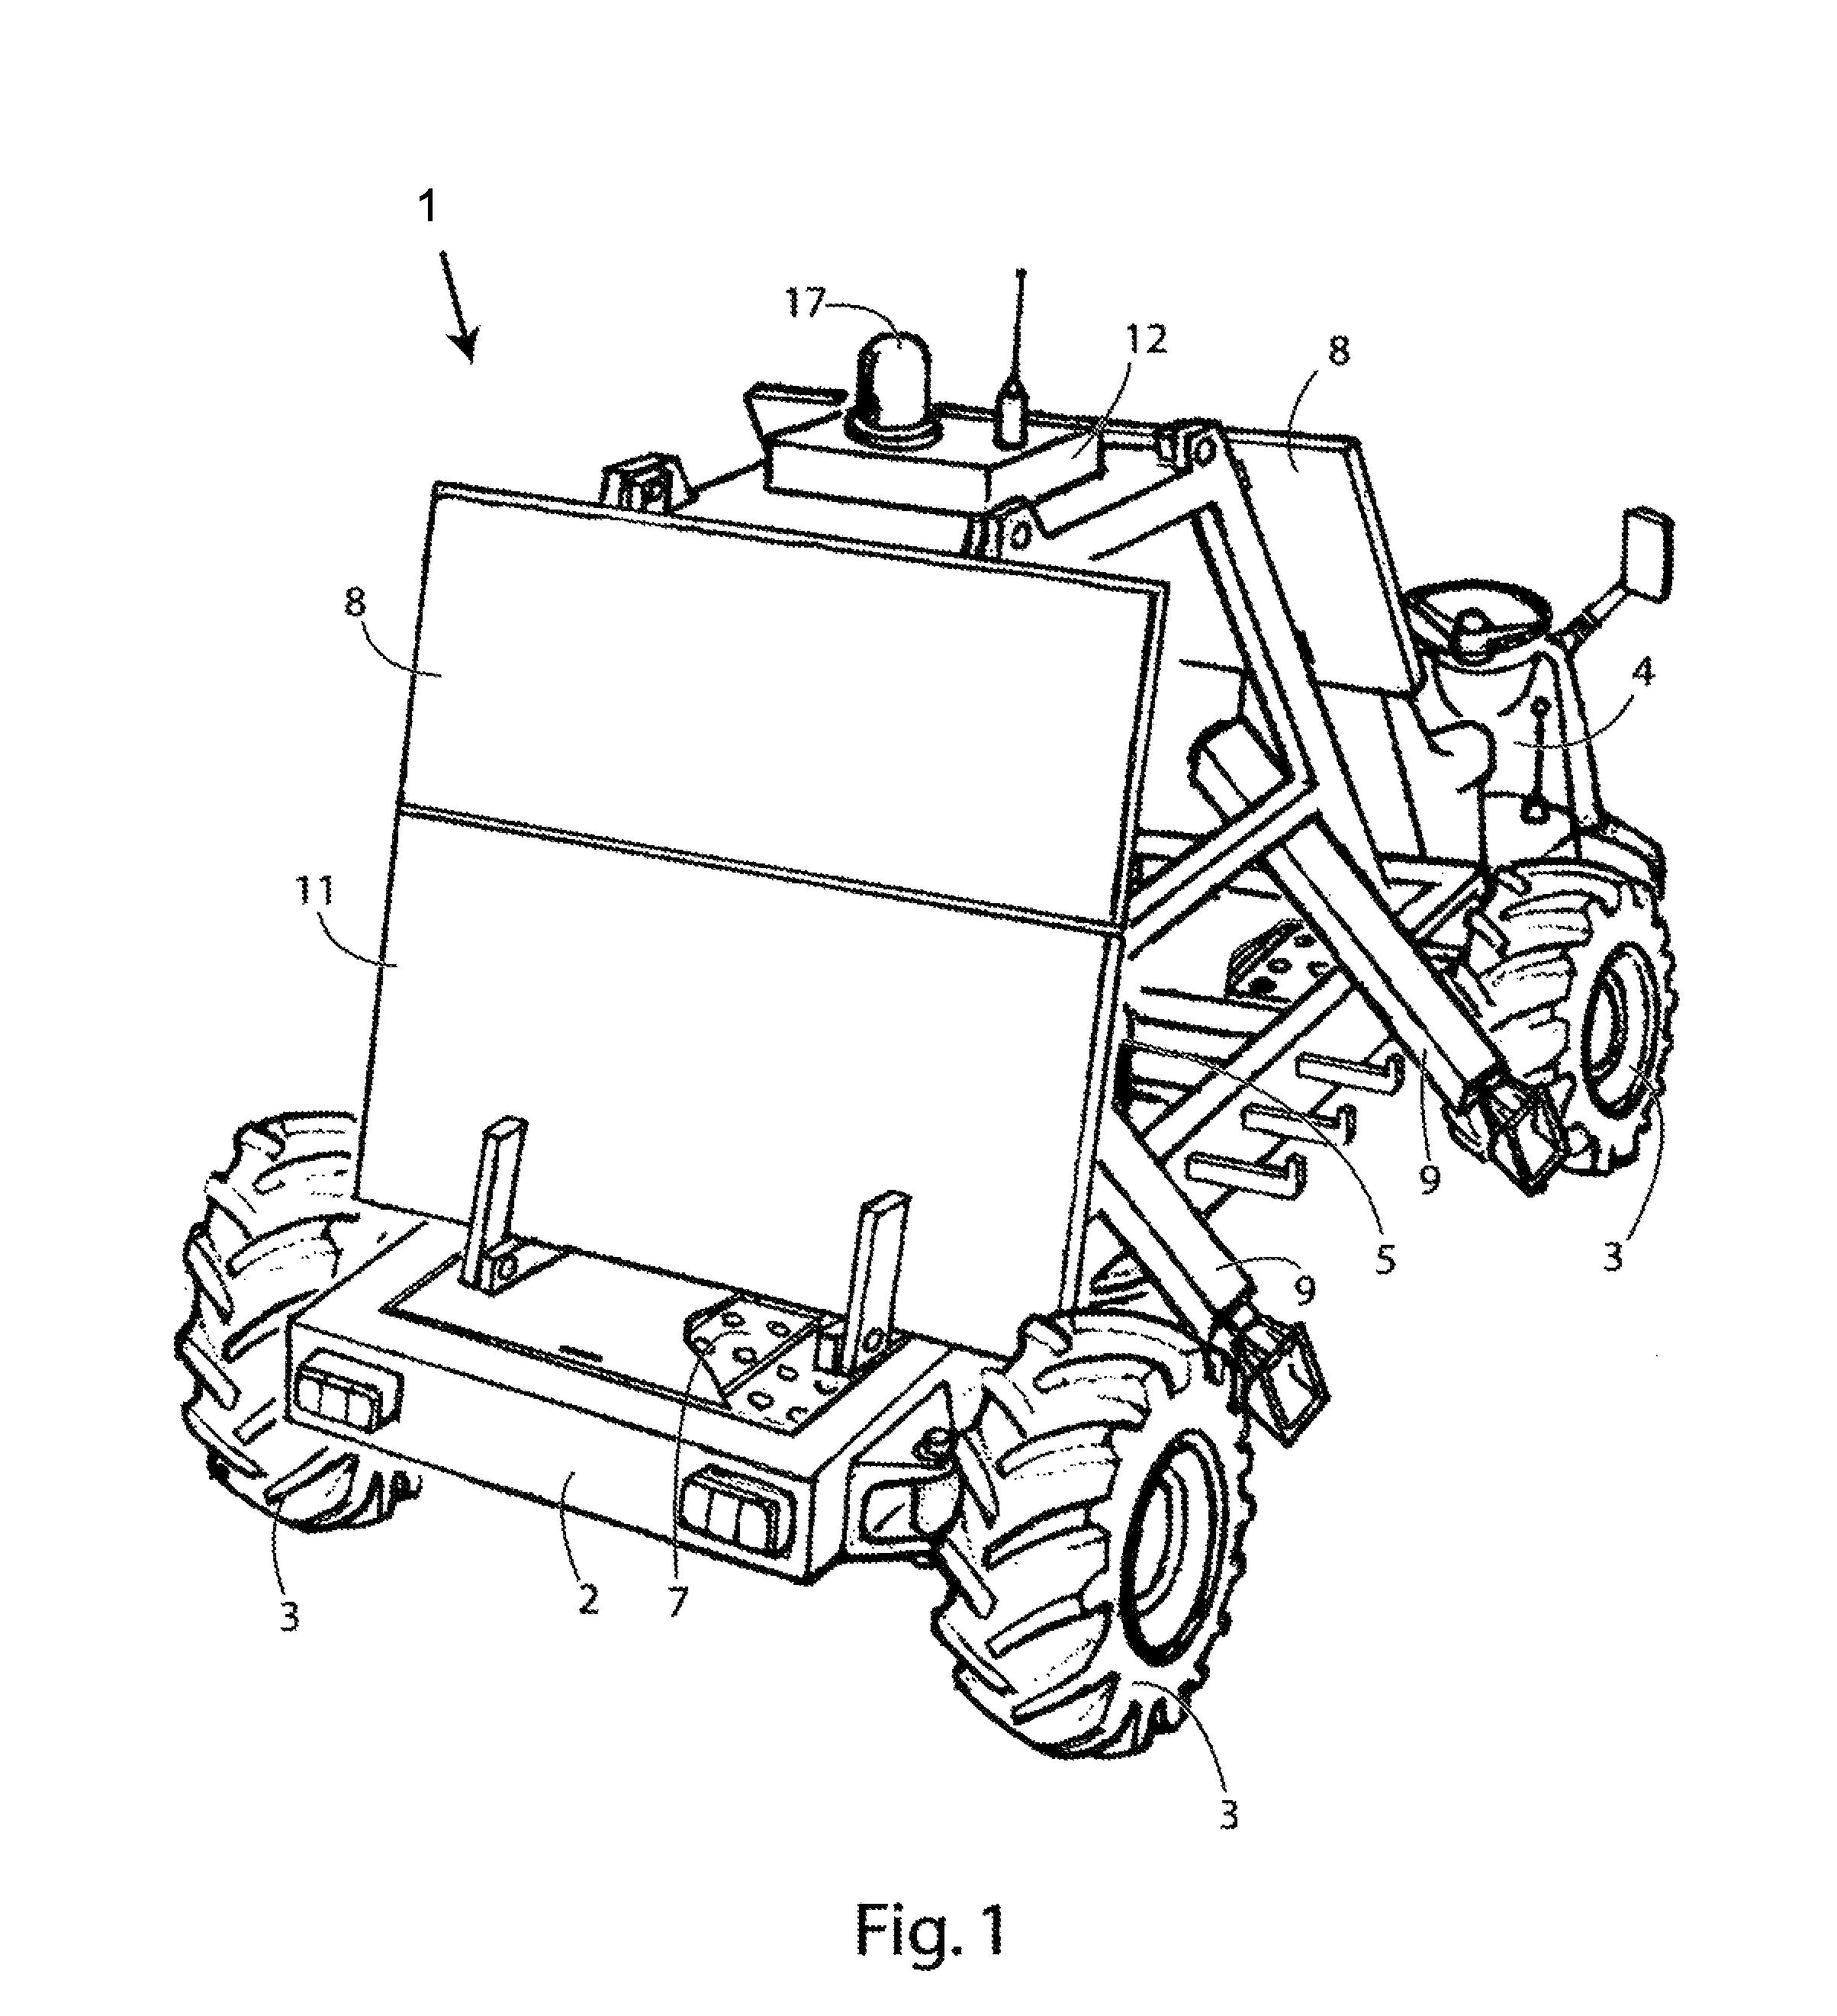 Agricultural traction system with cable and hoists